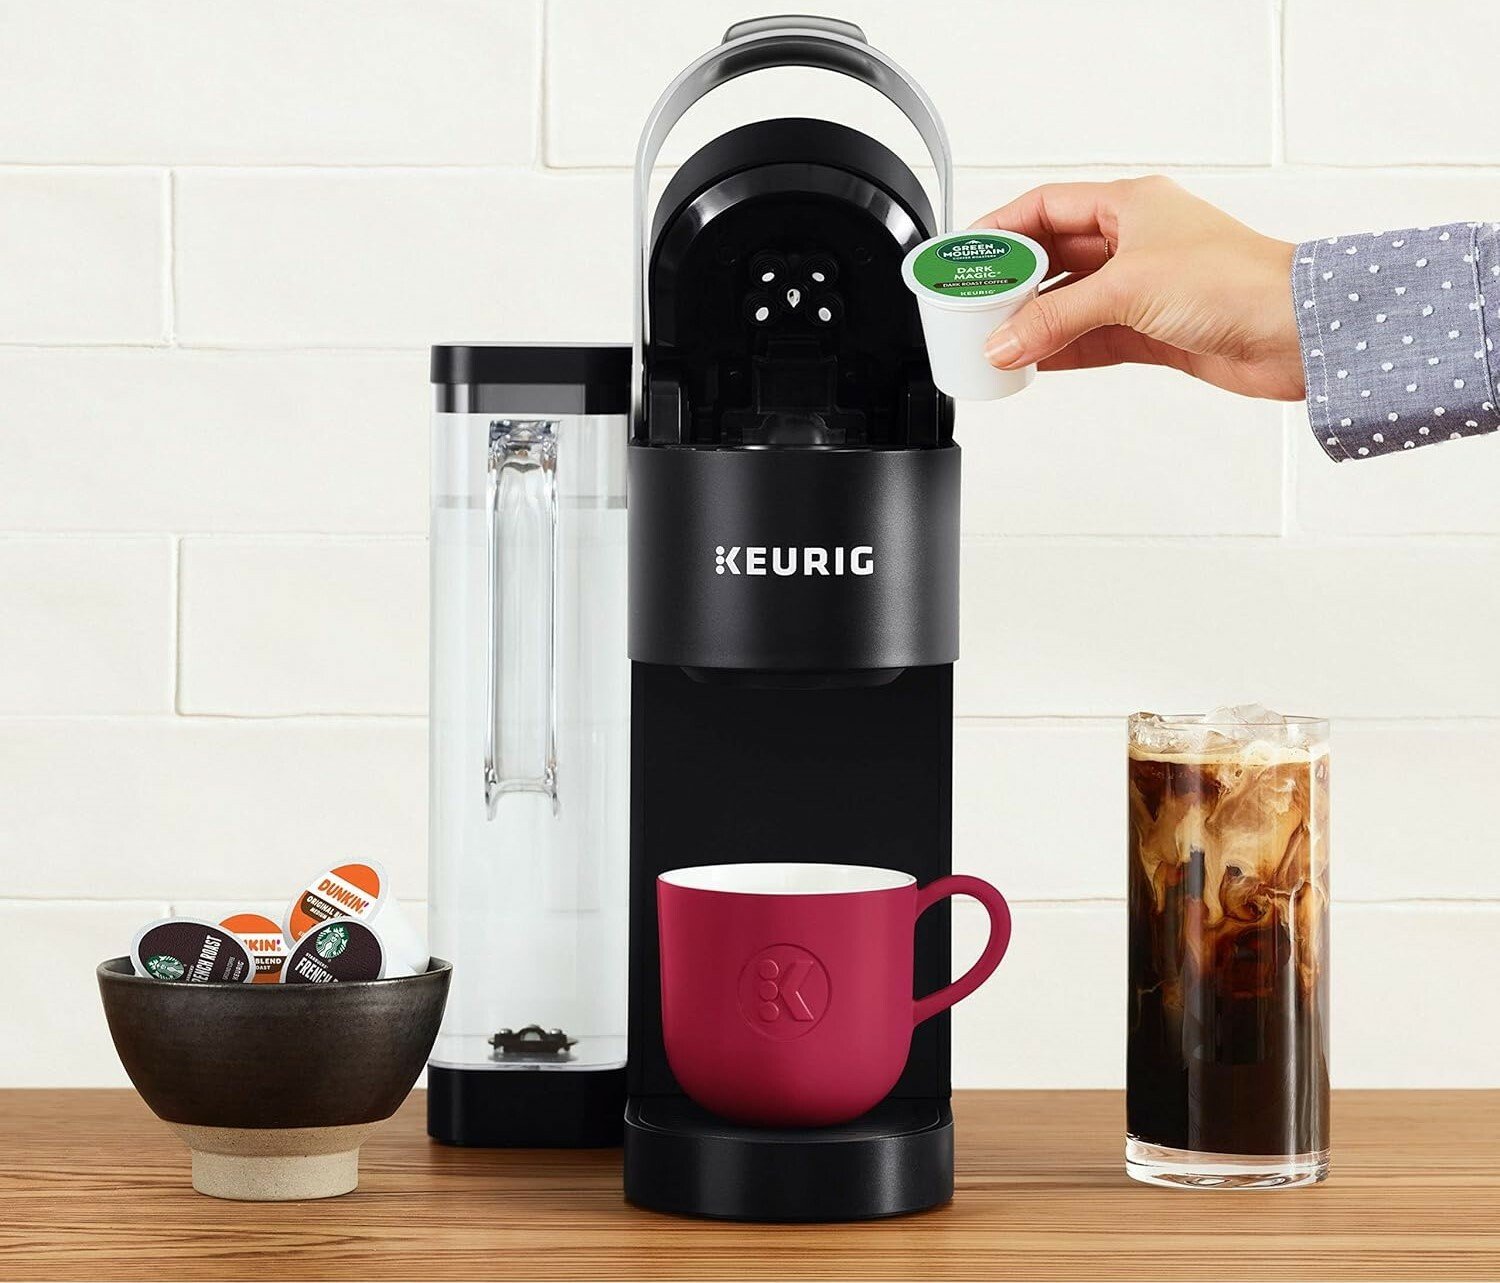 Keurig K-Supreme Single-Serve coffee maker pictured with a bowl of K-Cups and an iced coffee